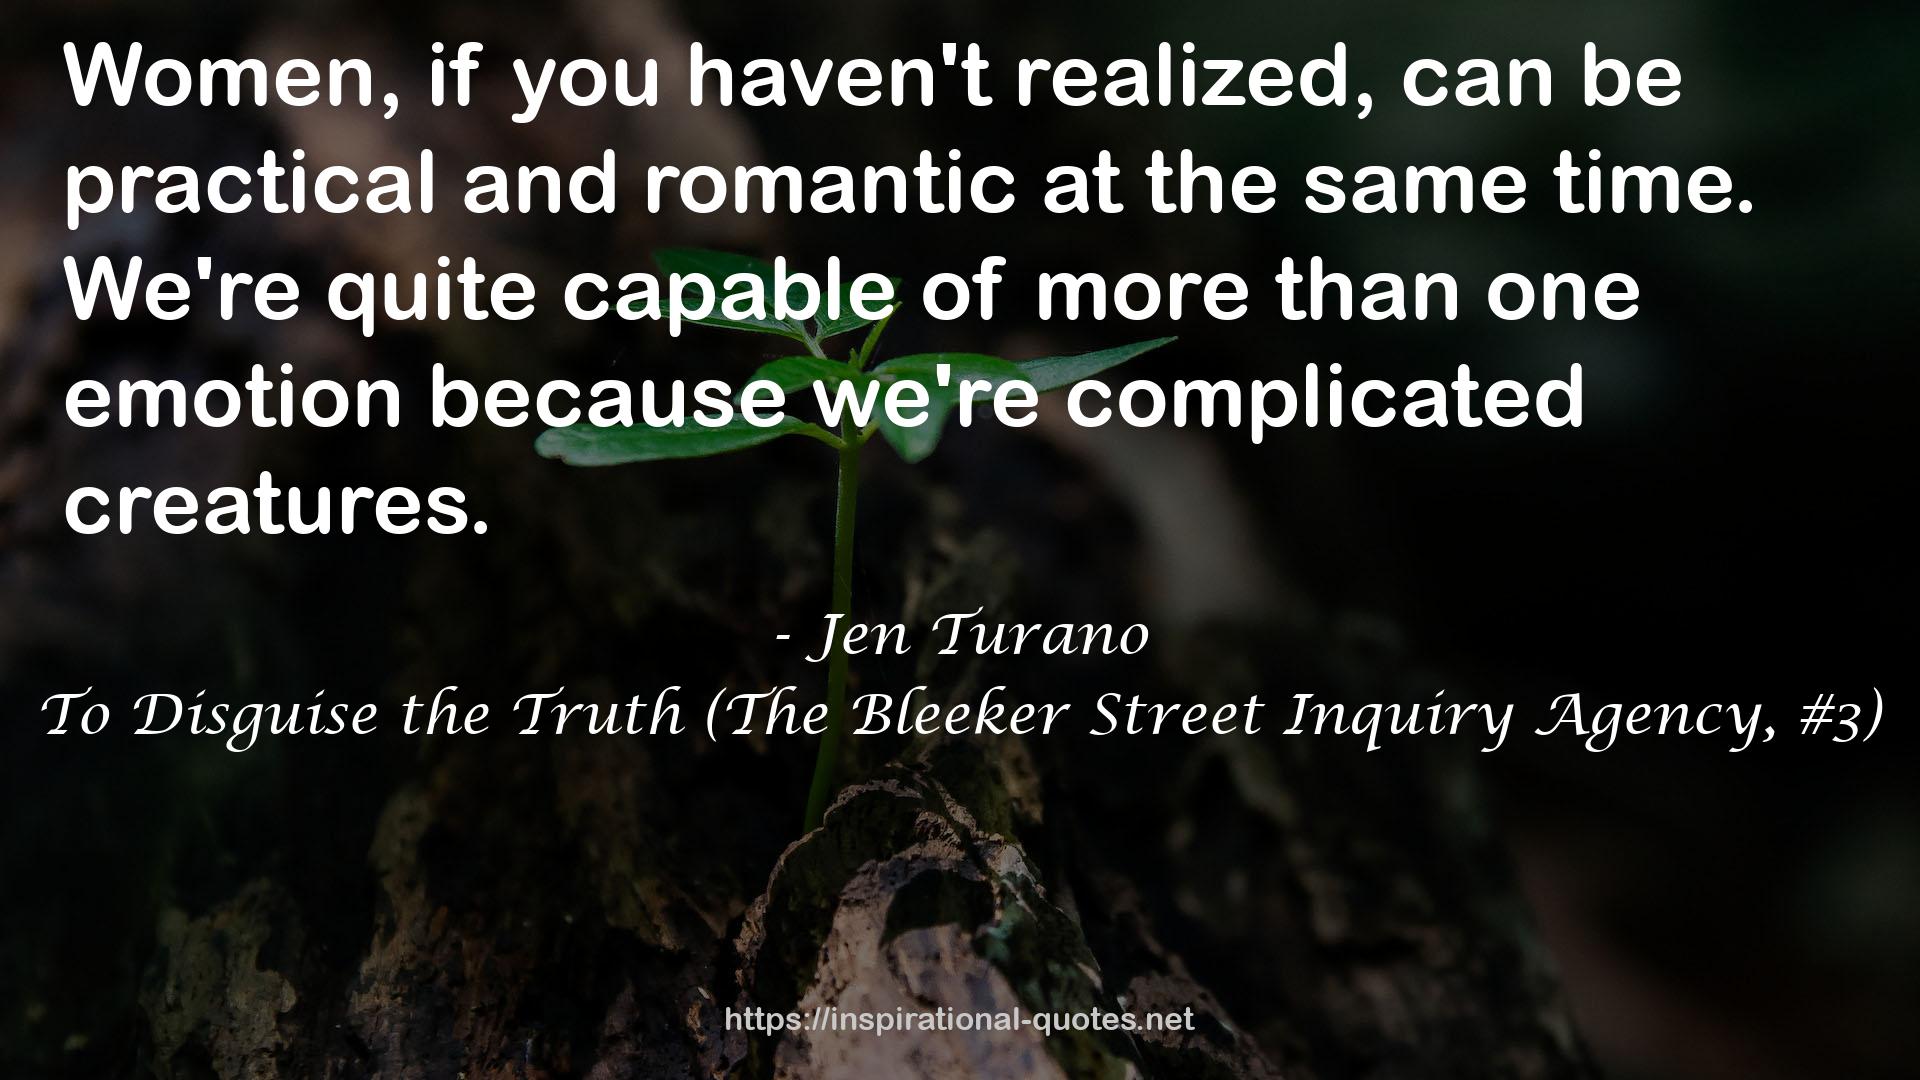 To Disguise the Truth (The Bleeker Street Inquiry Agency, #3) QUOTES